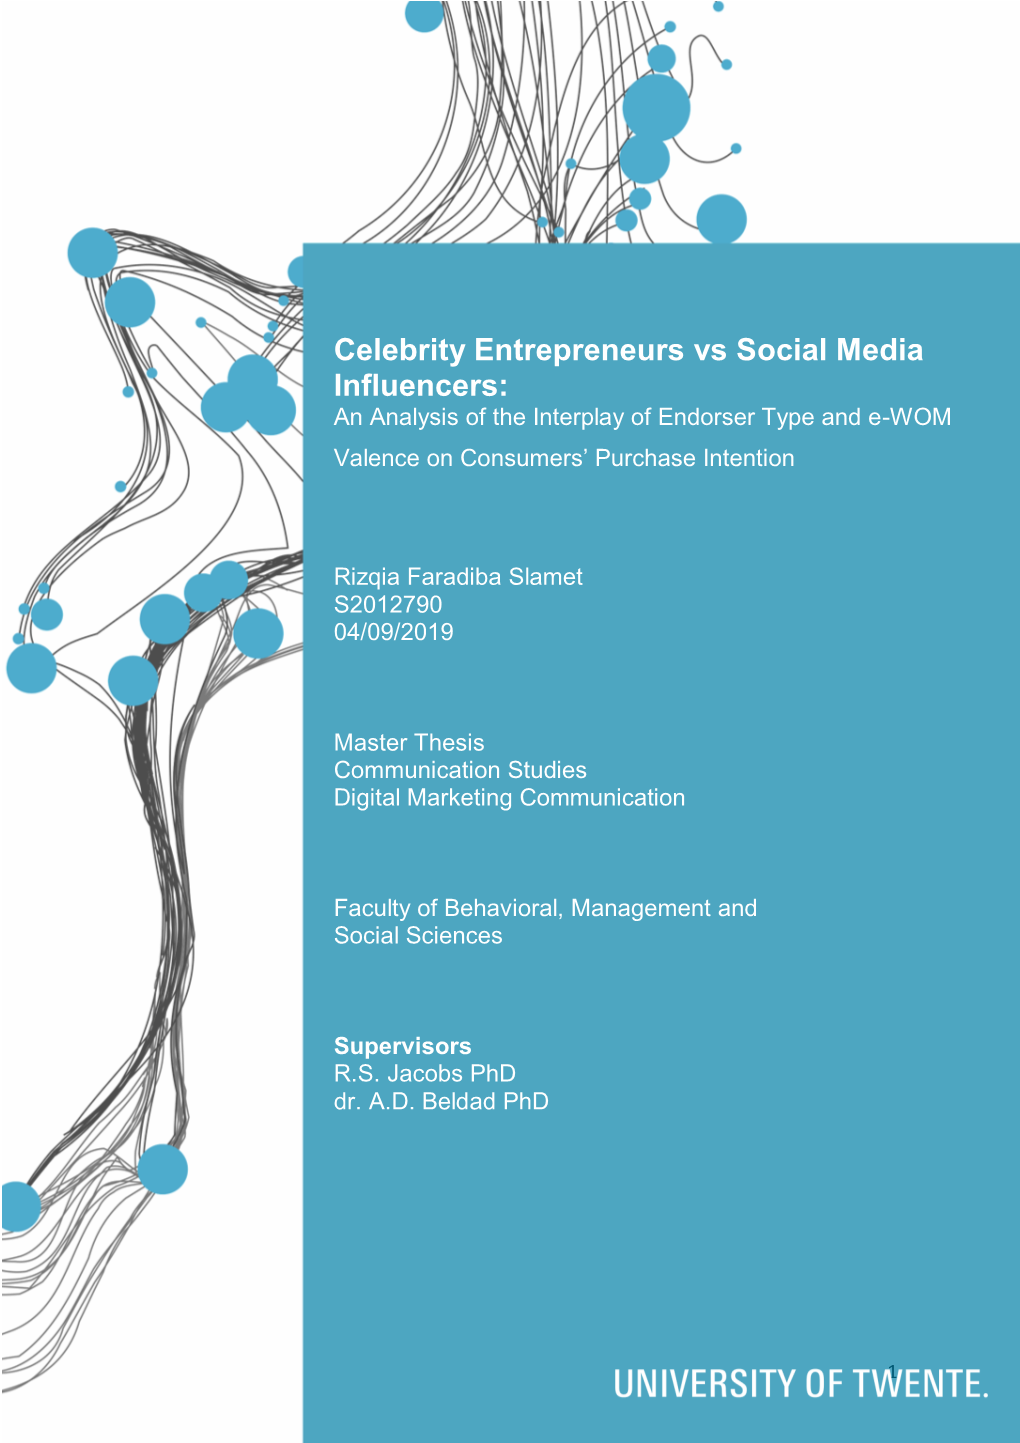 Celebrity Entrepreneurs Vs Social Media Influencers: an Analysis of the Interplay of Endorser Type and E-WOM Valence on Consumers’ Purchase Intention